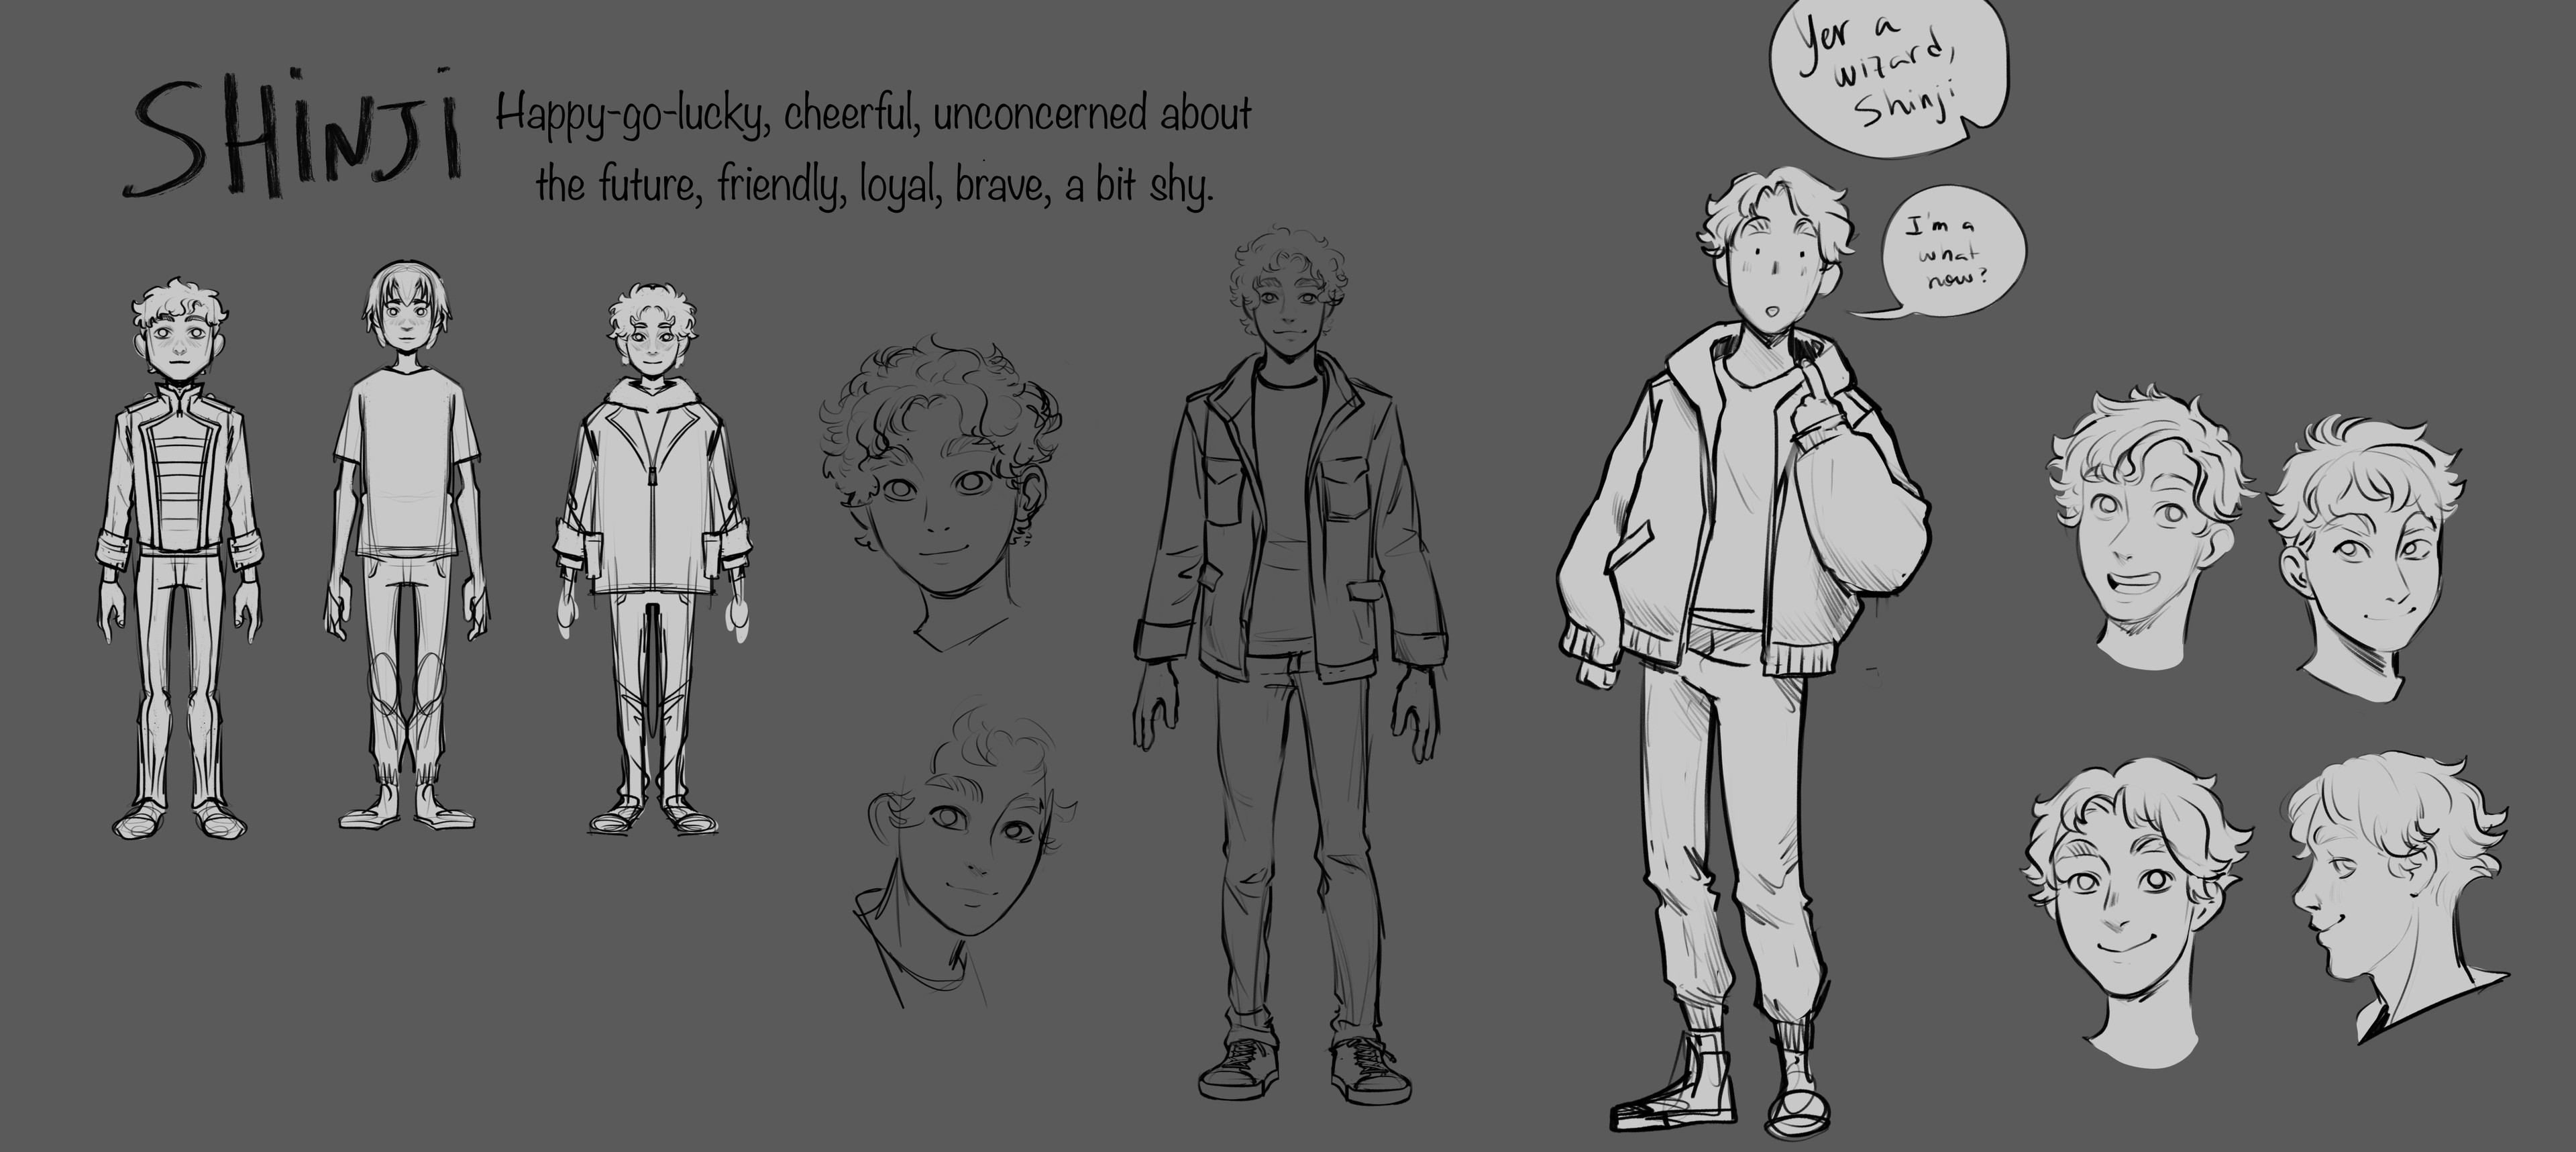 Shinji was supposed to be the main character, and his traits were in the briefing. I tried to make a friendly character, someone you would trust and want as a friend.